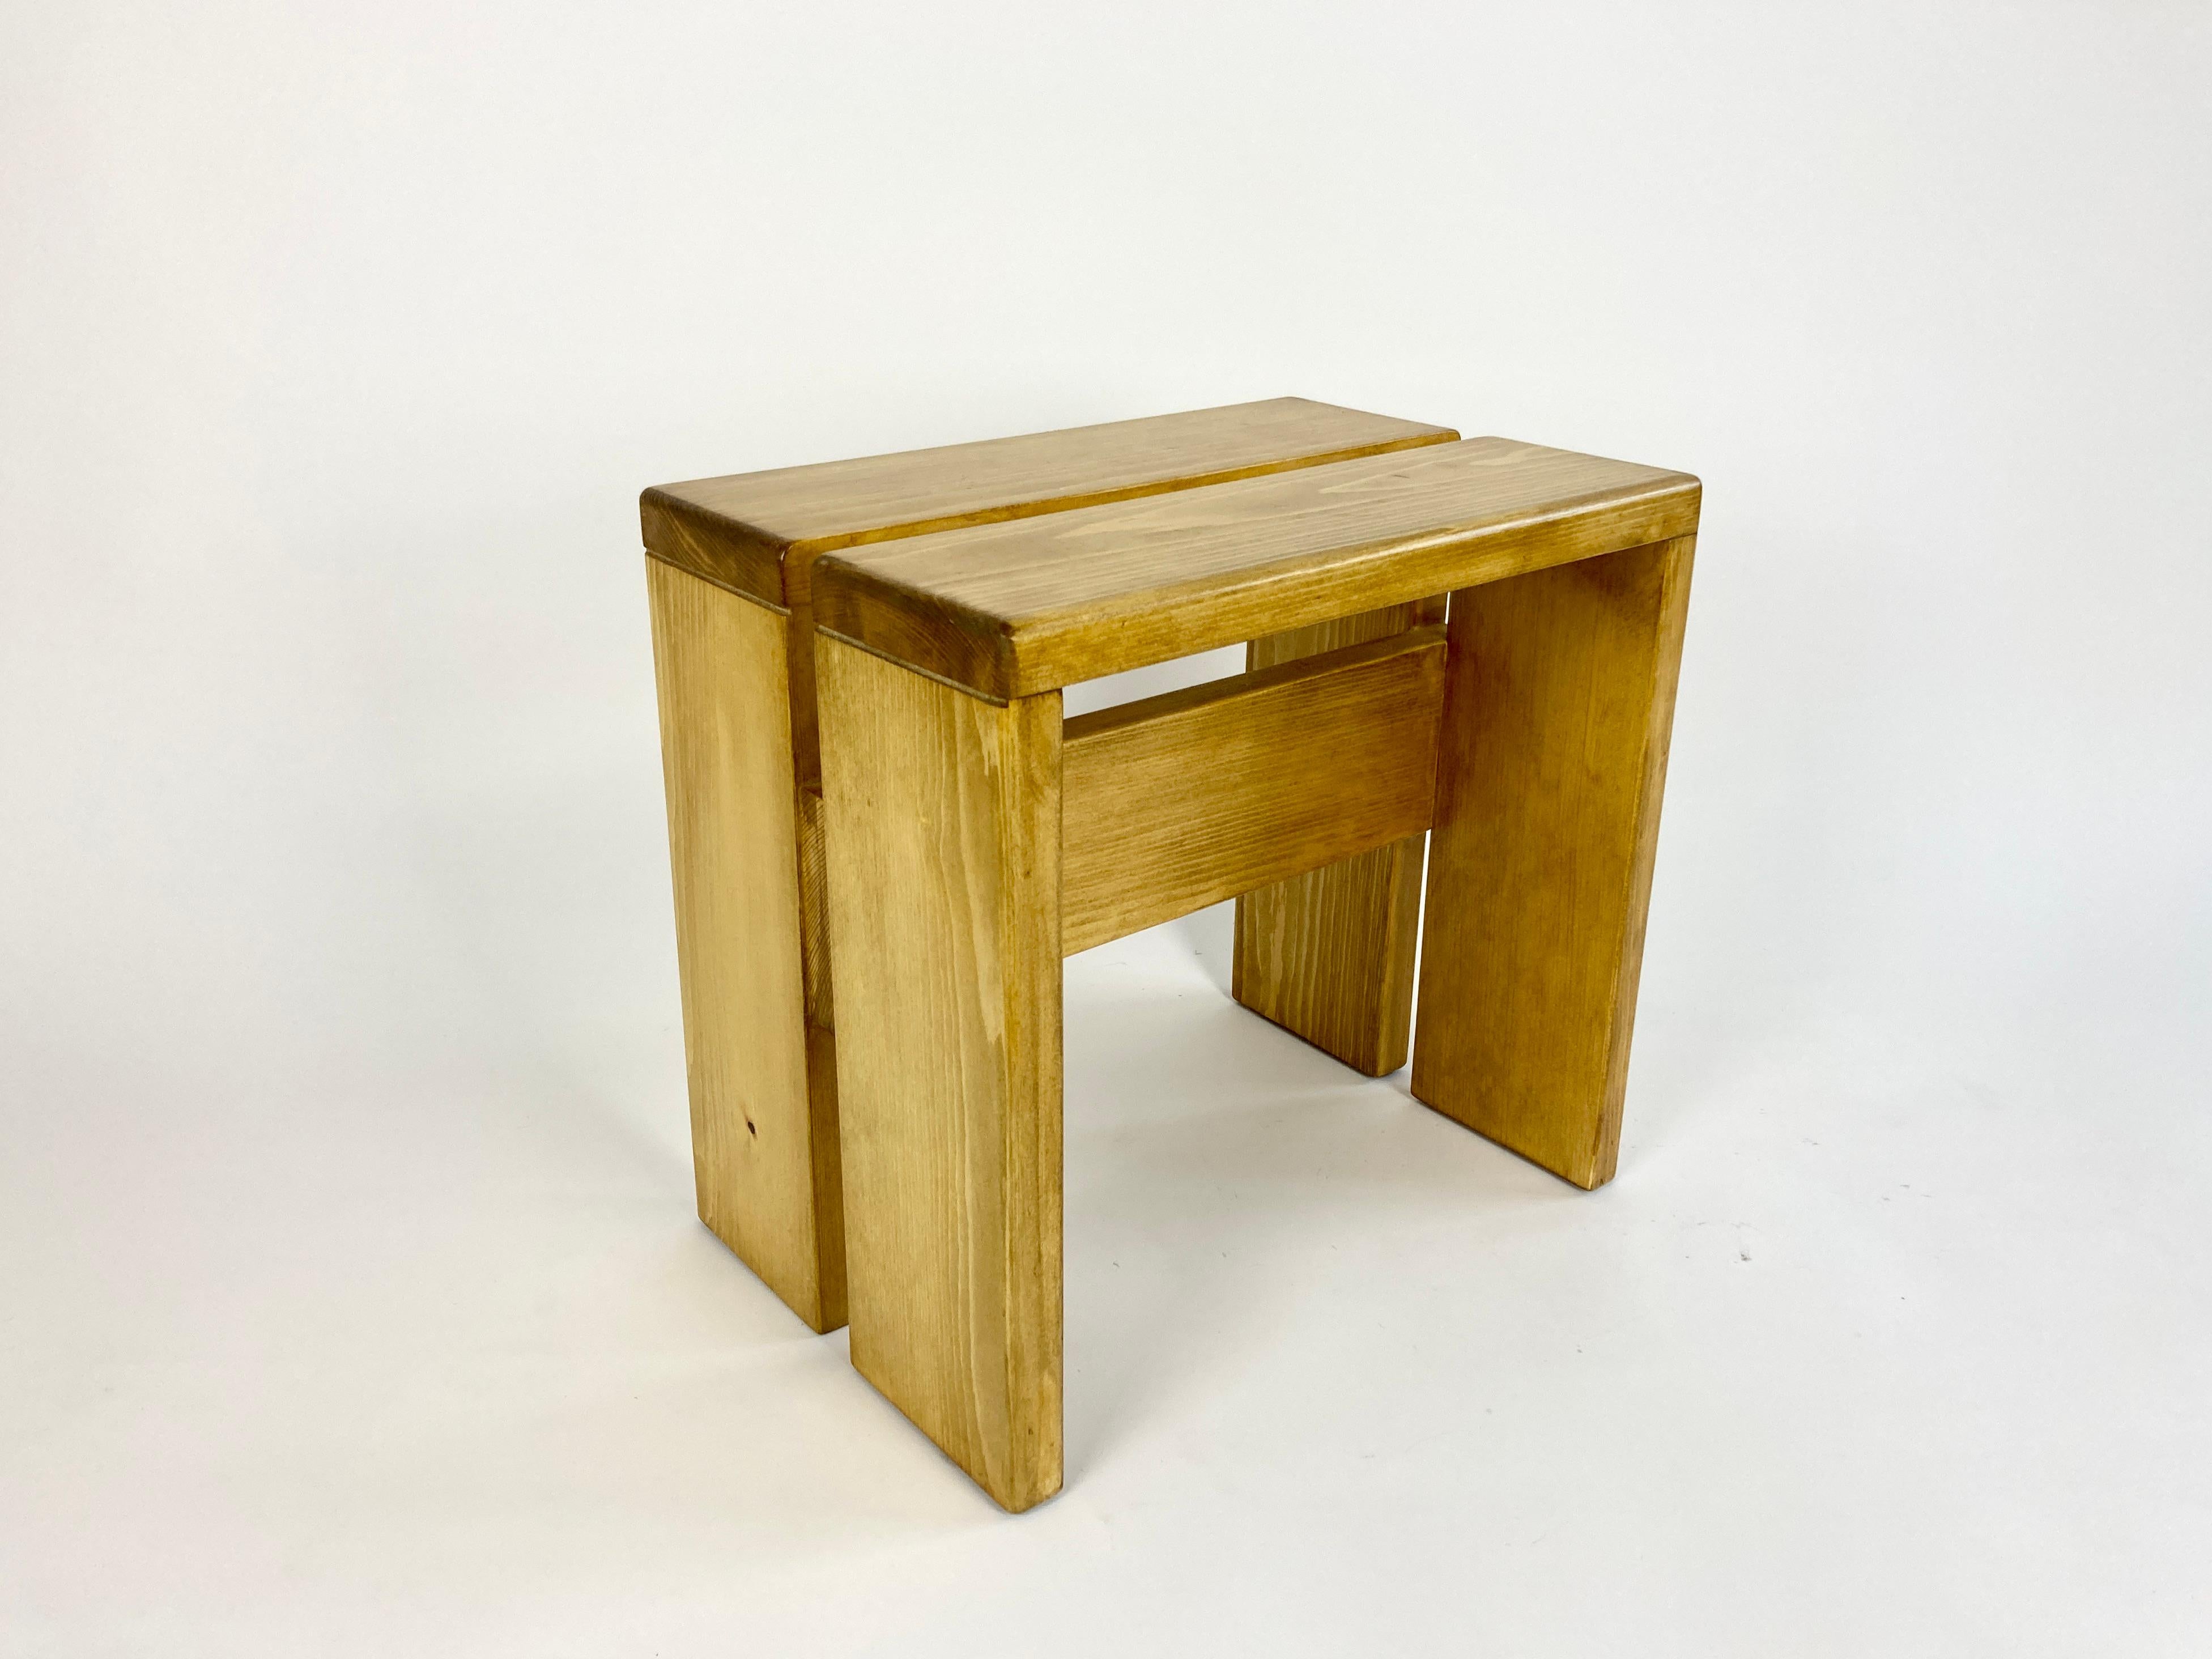 20th Century Stool / Side Table / Small Bench from Les Arcs, France. Charlotte Perriand